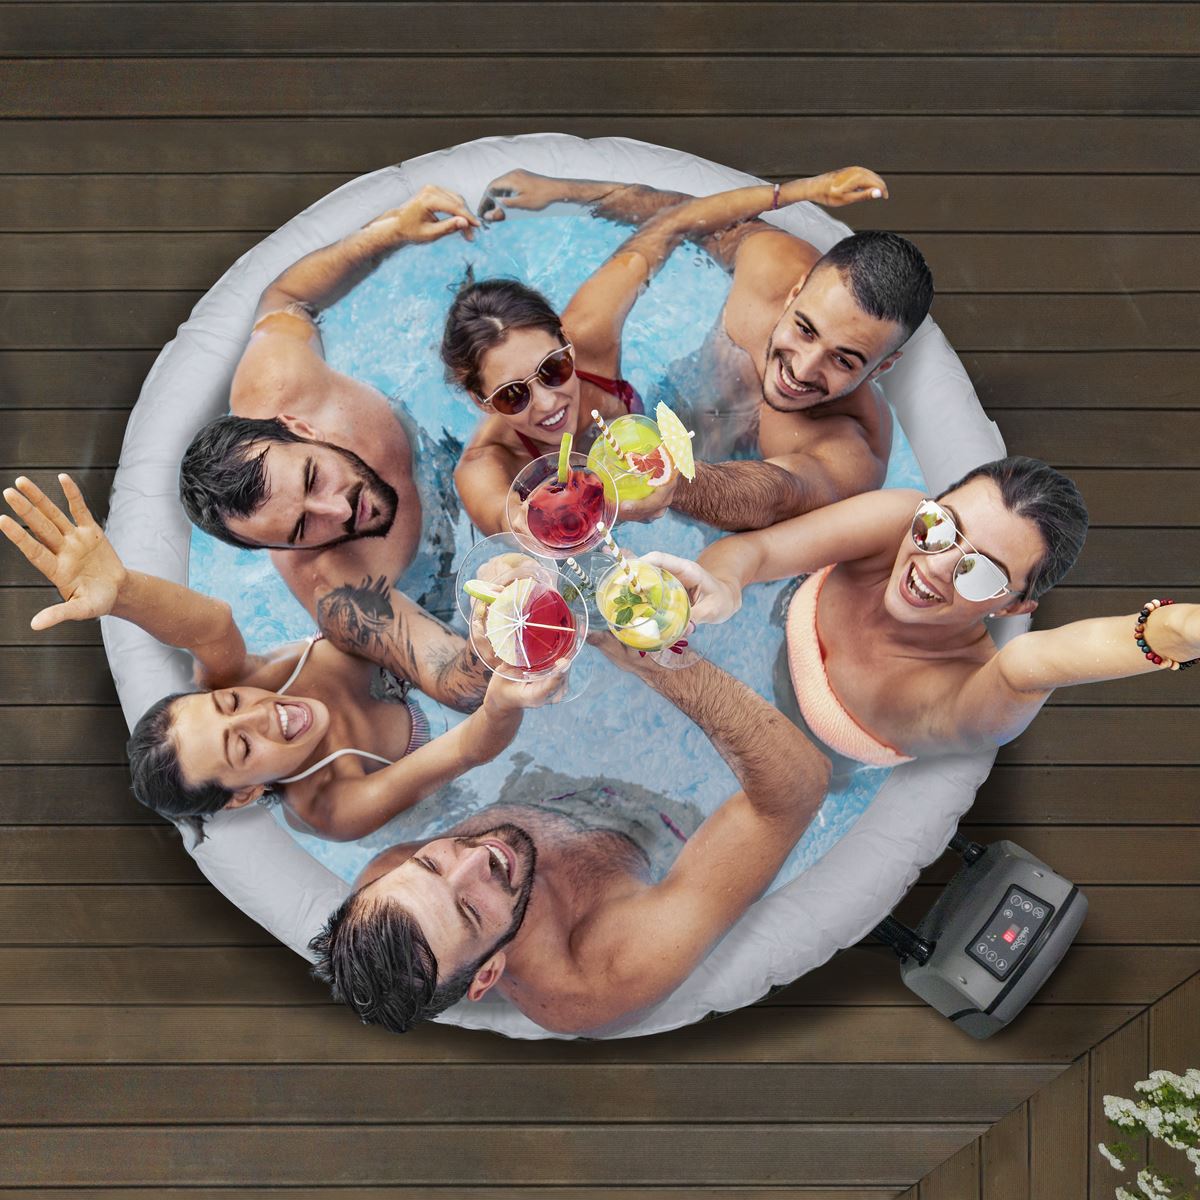 Dellonda 4-6 Person Inflatable Hot Tub Spa with Smart Pump - Wood Effect